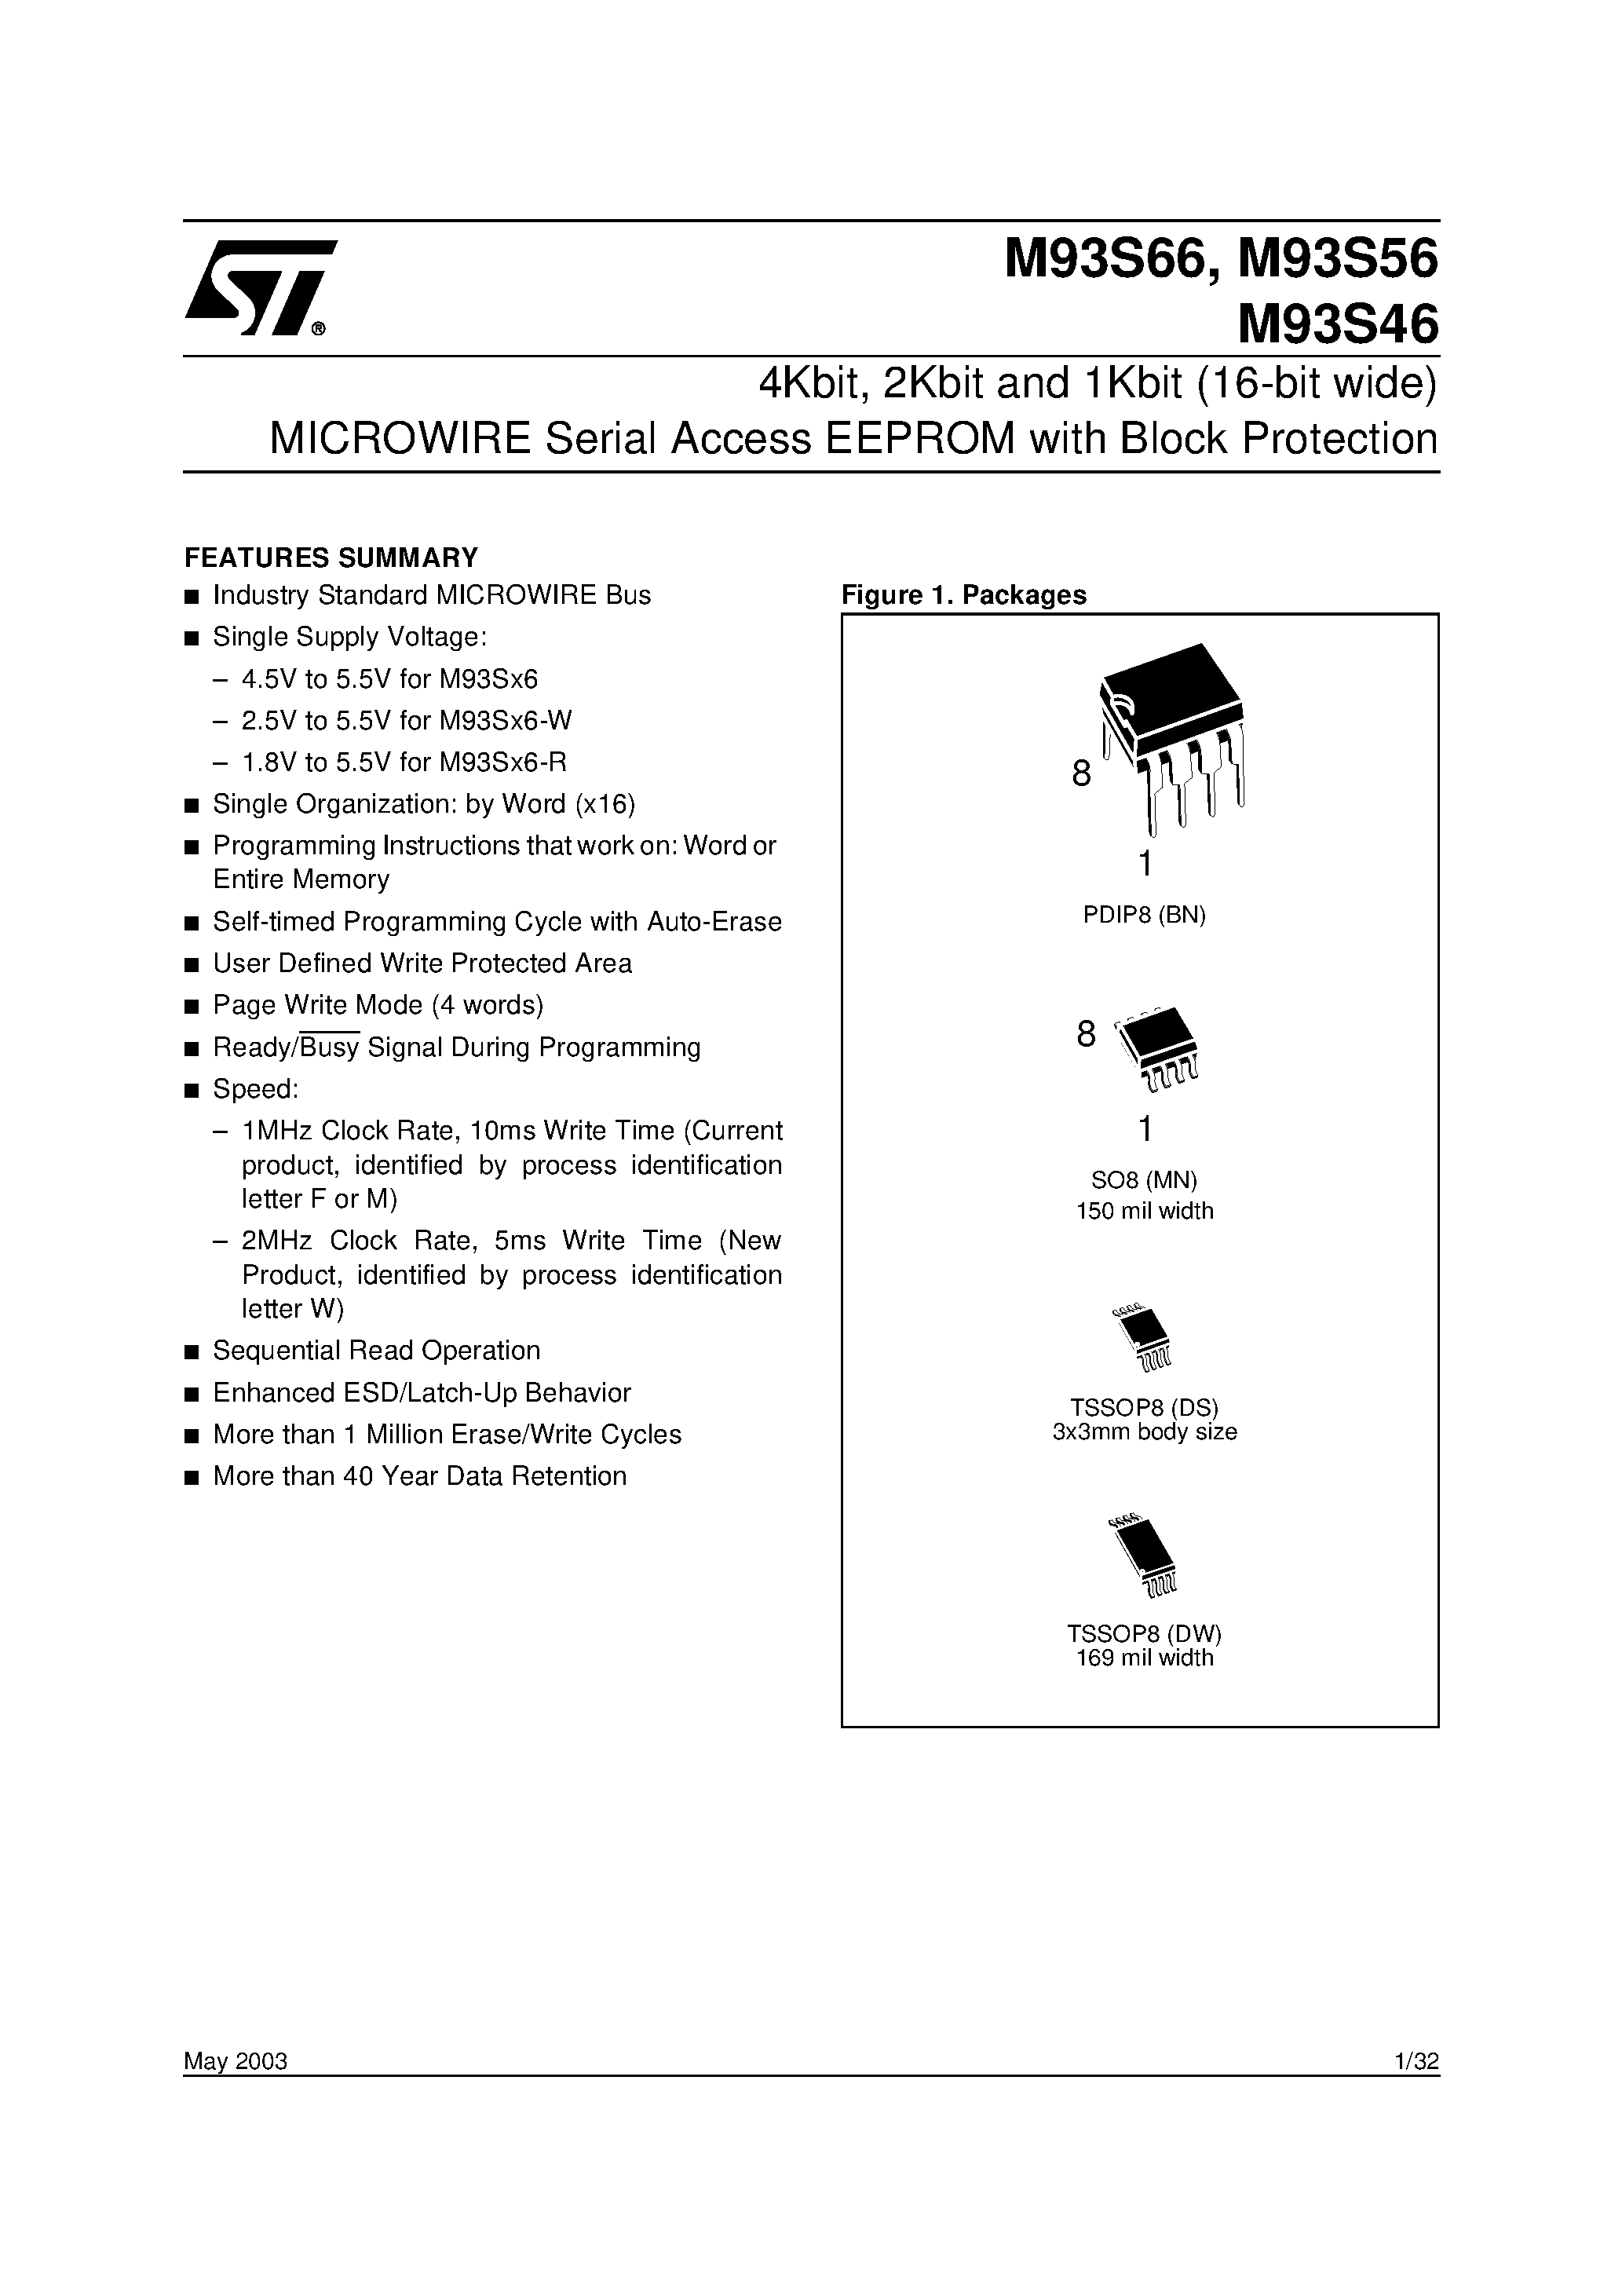 Datasheet M93S56 - 4Kbit / 2Kbit and 1Kbit 16-bit wide MICROWIRE Serial Access EEPROM with Block Protection page 1